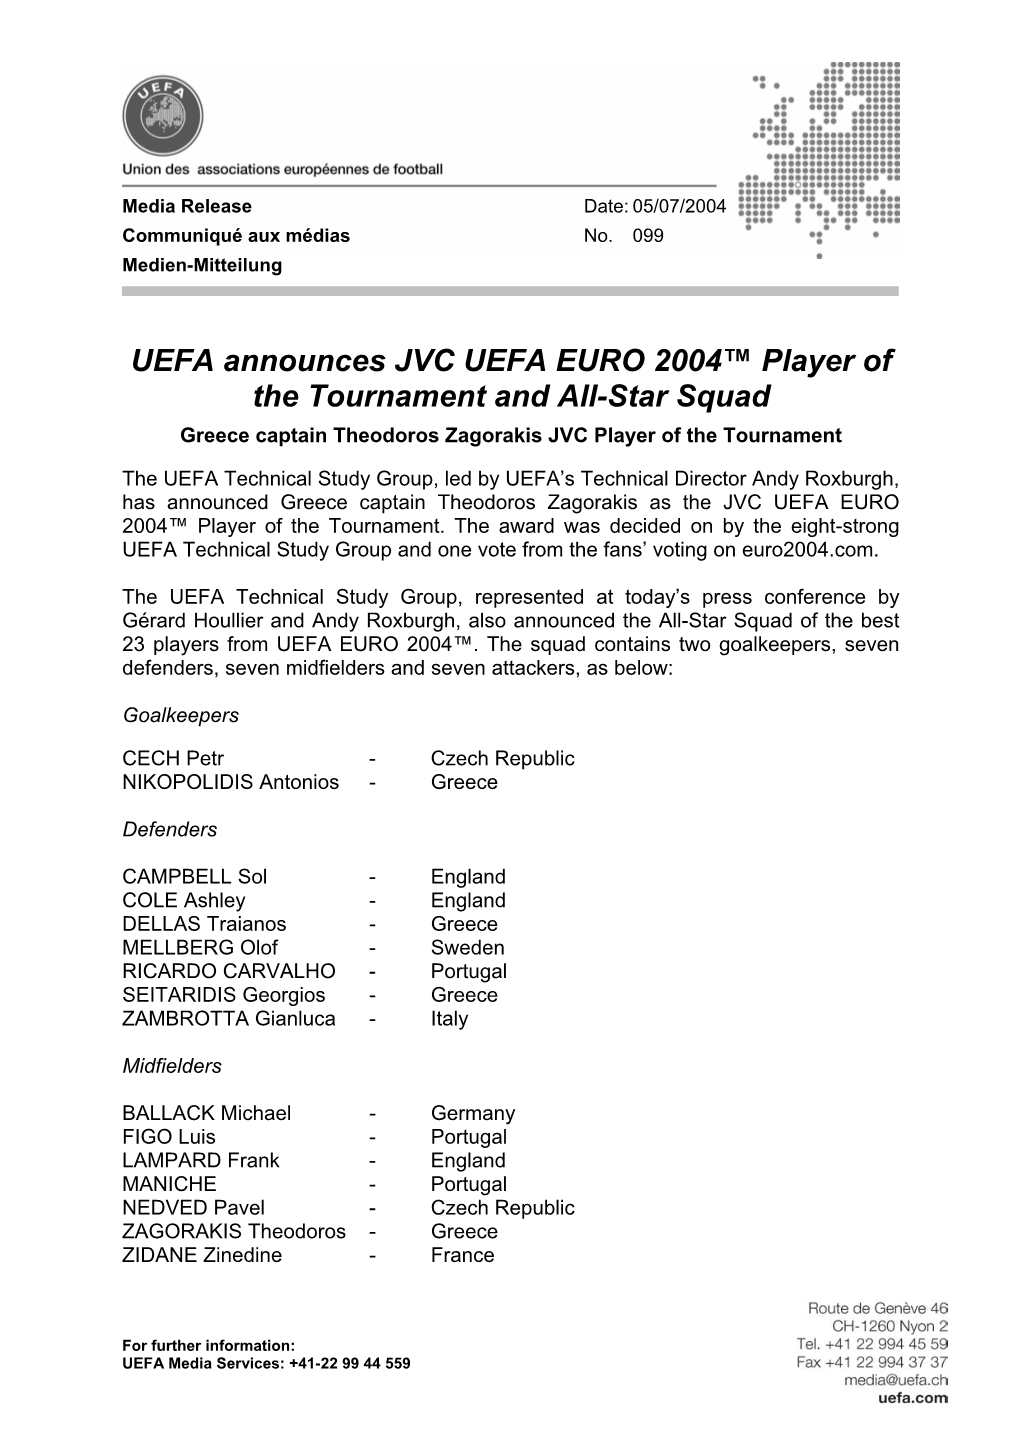 UEFA Announces JVC UEFA EURO 2004™ Player of the Tournament and All-Star Squad